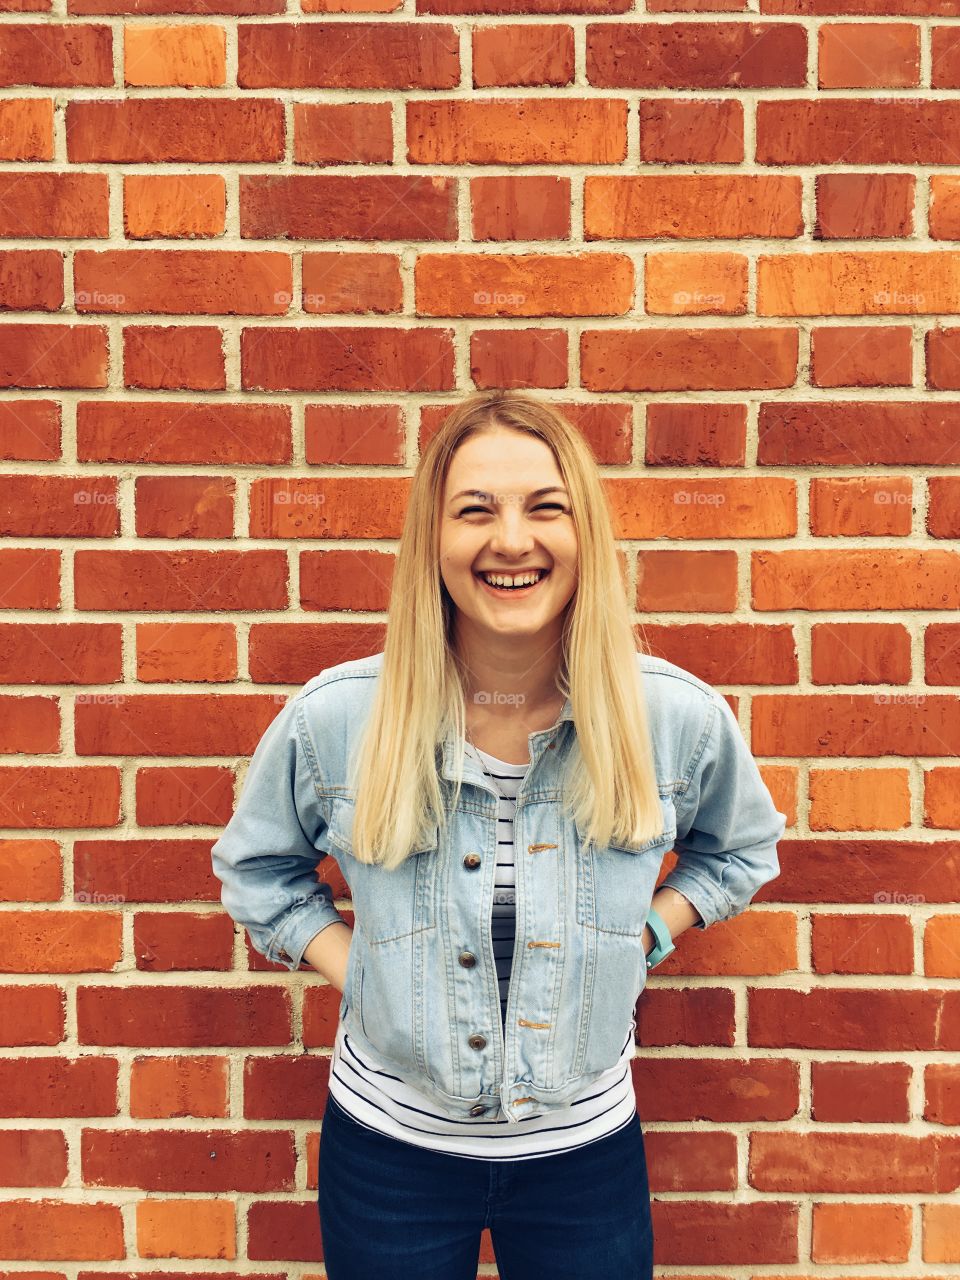 Young blonde girl smiling near brick wall.